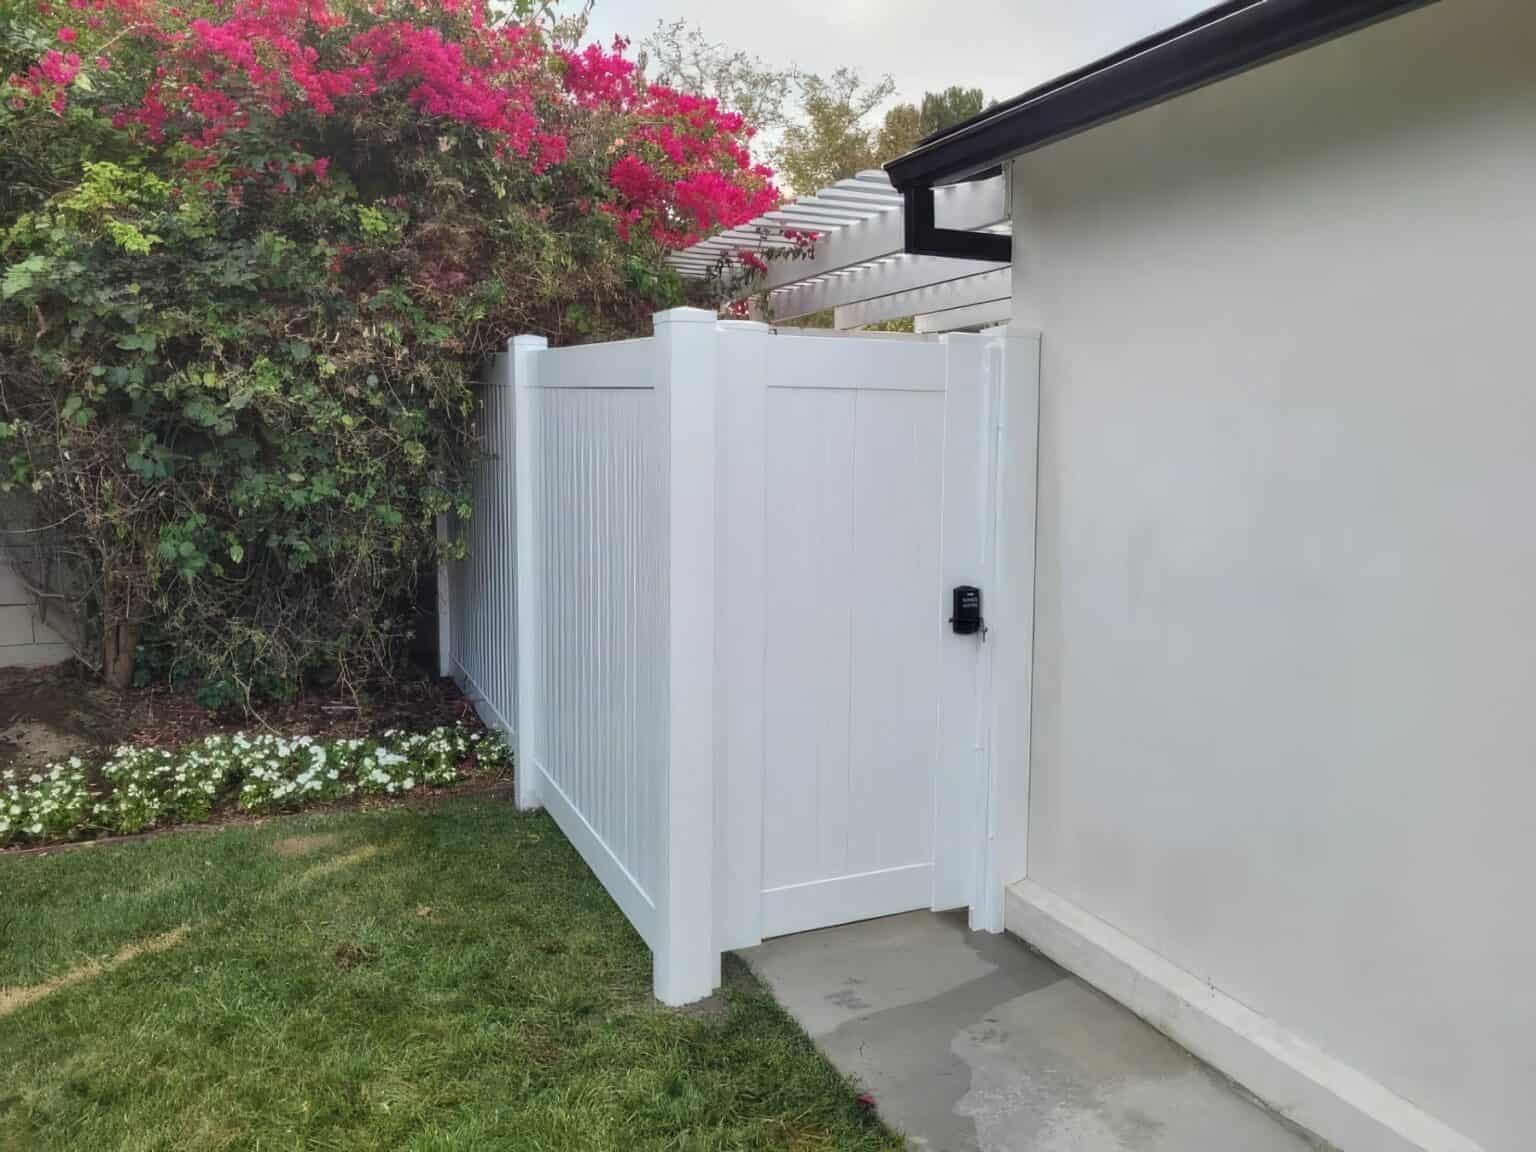 Cute white vinyl single side gate separating the grassy backyard garden from the post modern patio with a black handle.